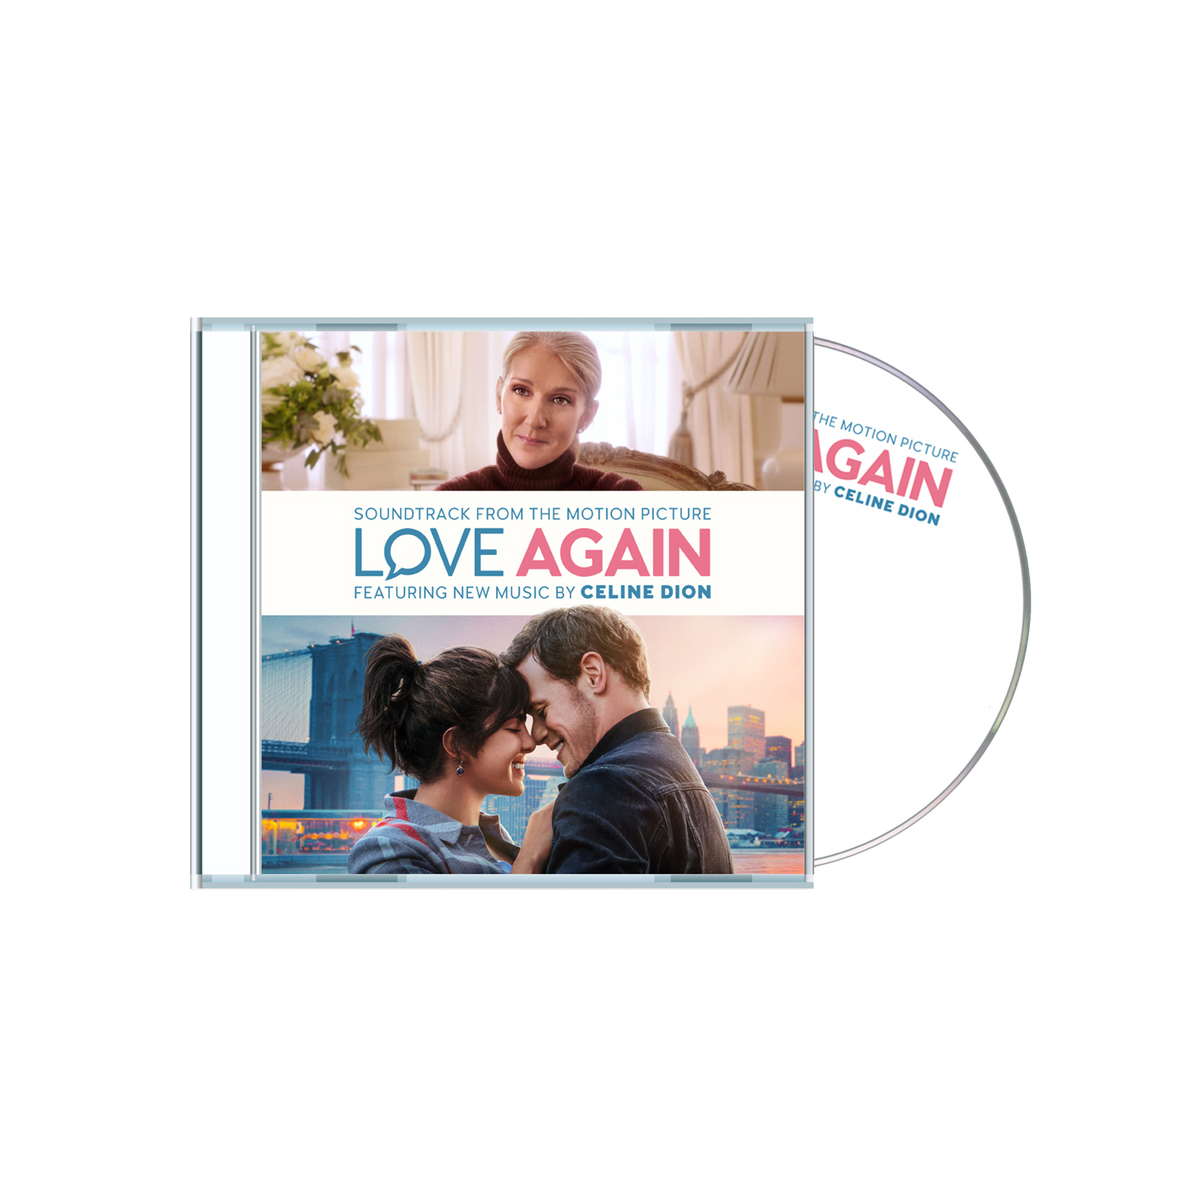 ALBUM LOVE AGAIN (Soundtrack from The Motion Picture)